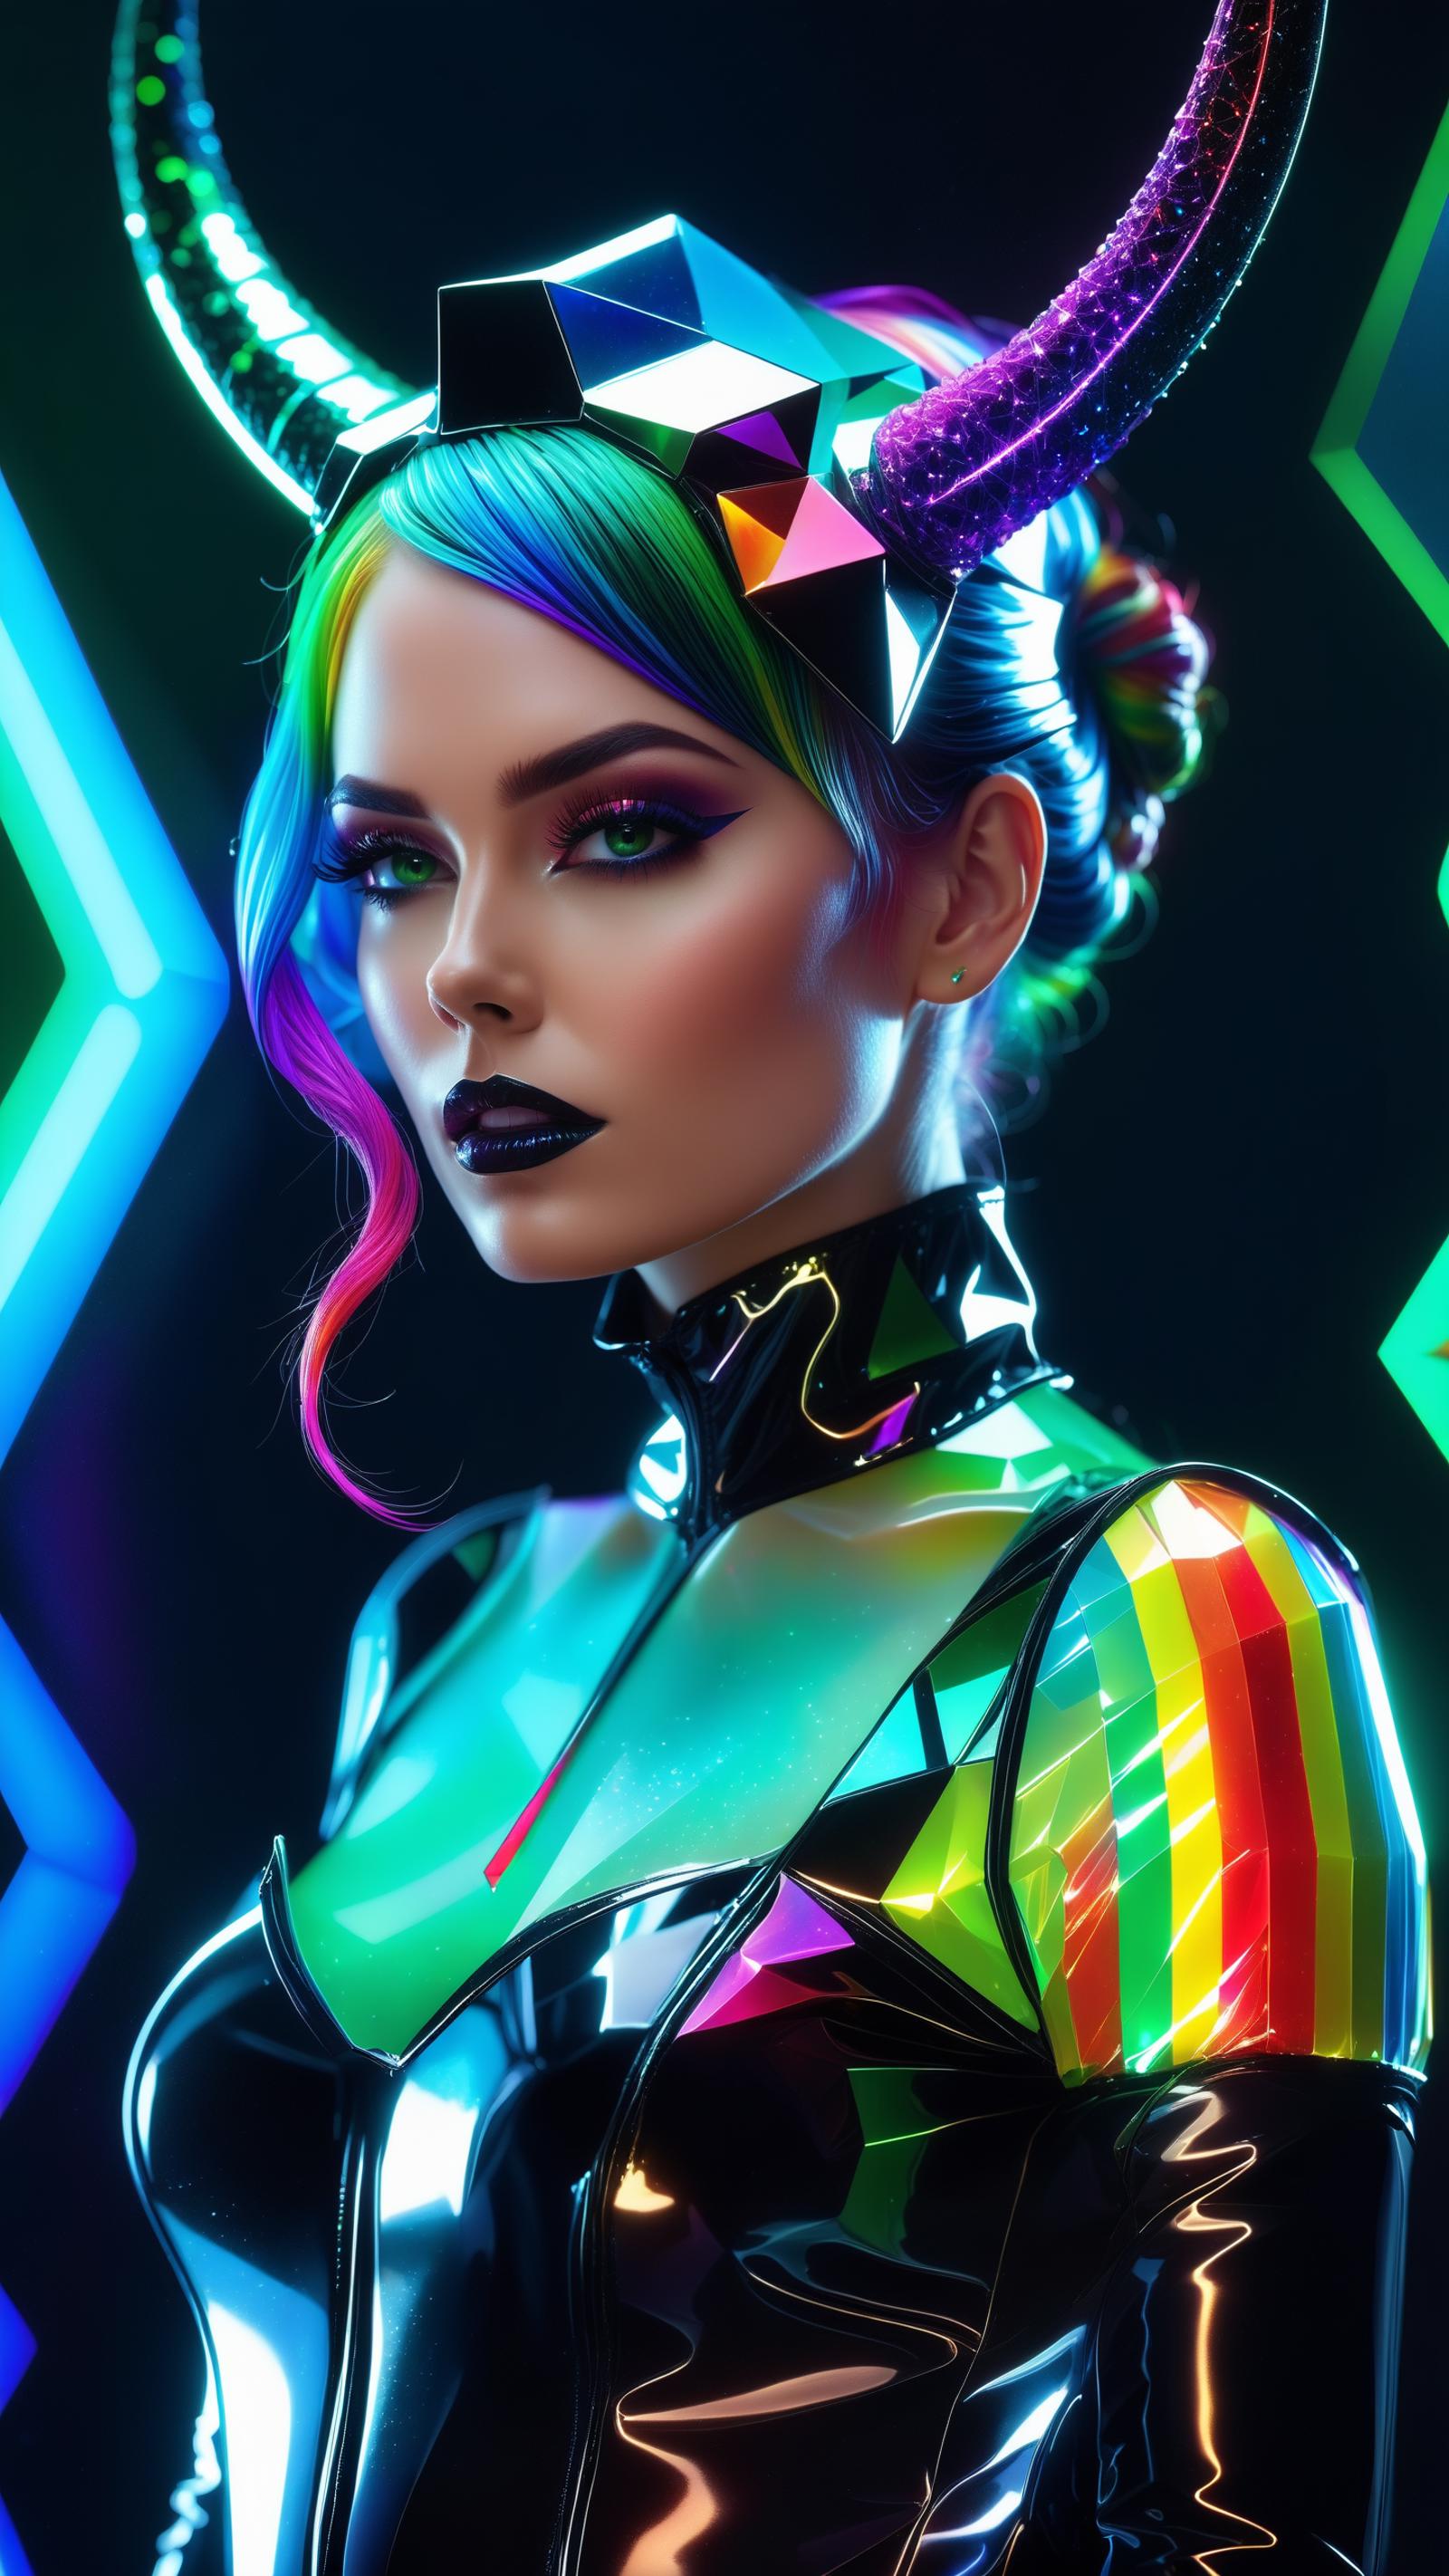 A digital painting of a woman with green eyes, a rainbow hair, and a black and gold shirt.